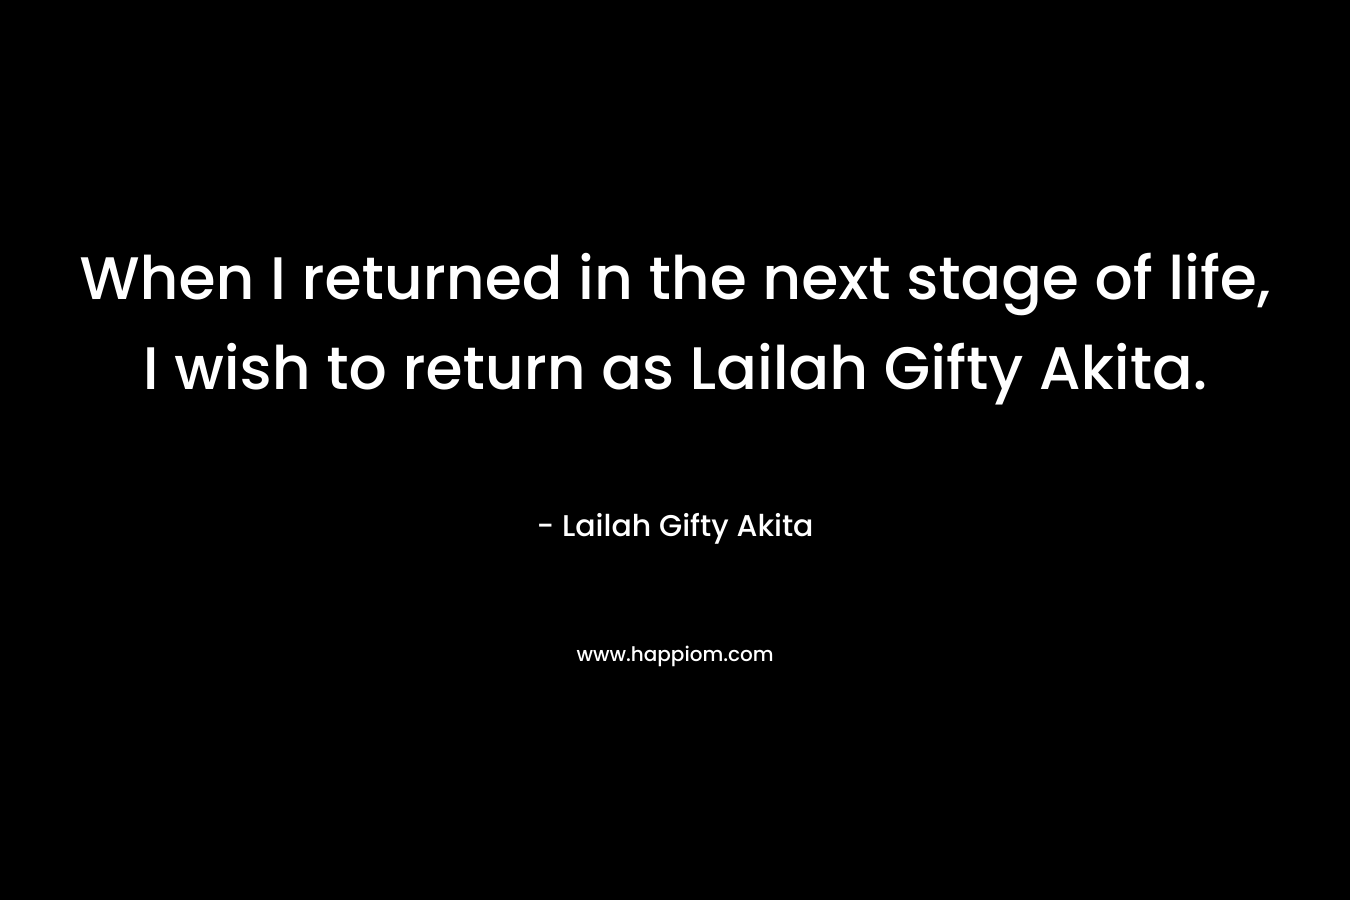 When I returned in the next stage of life, I wish to return as Lailah Gifty Akita.